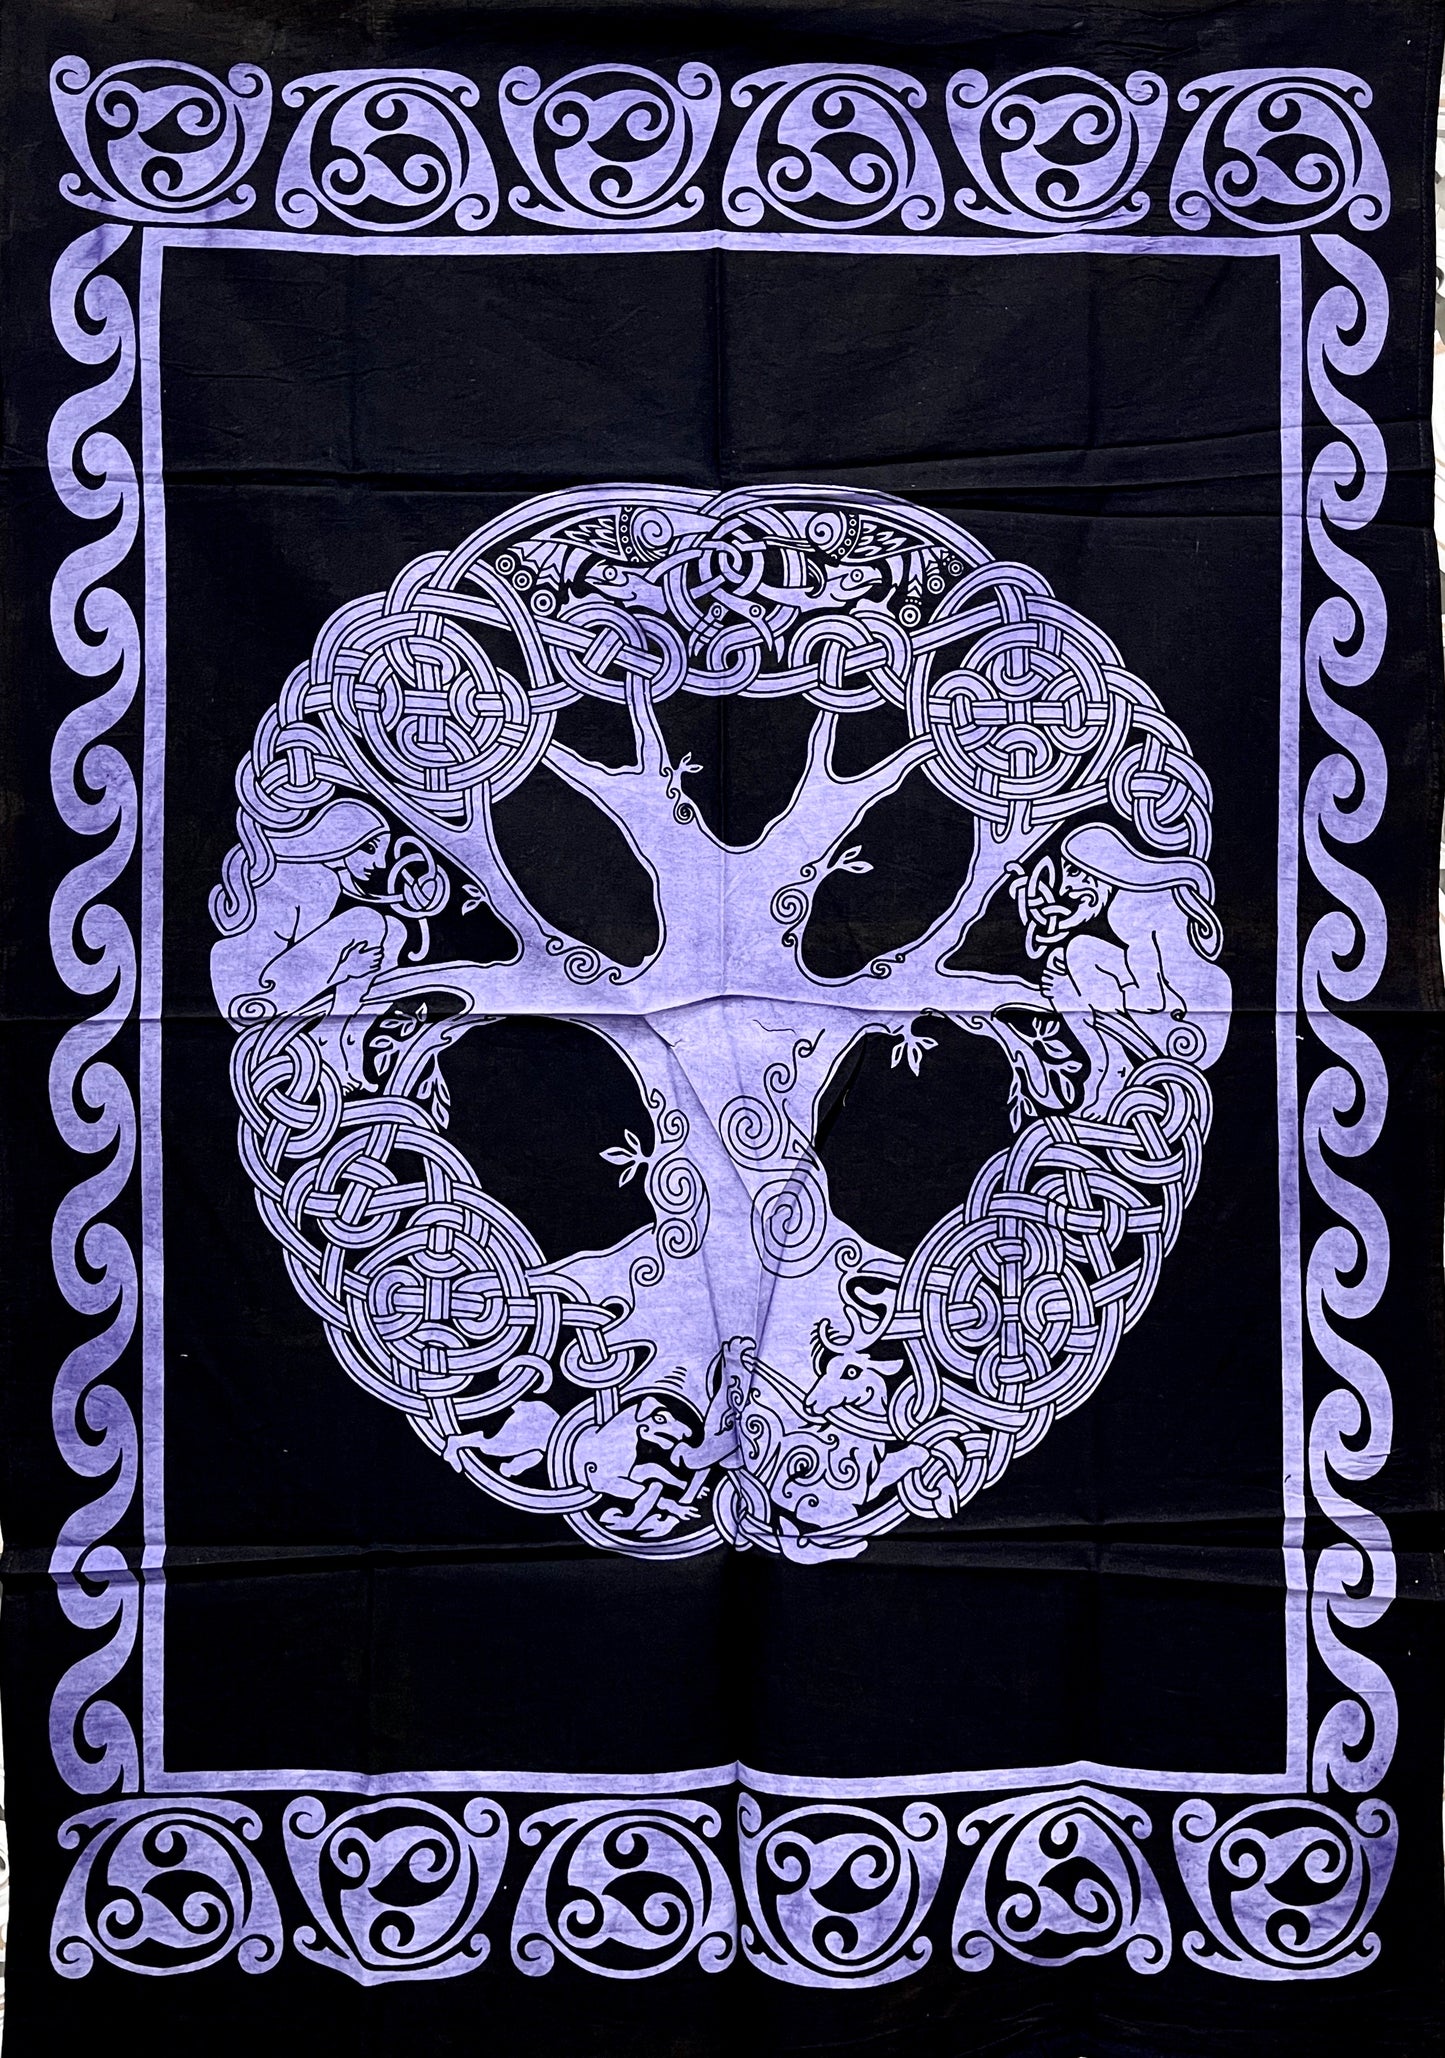 Hand printed Fabric Posters Mini Celtic Knot Tree Tapestries - Available in 5 colors